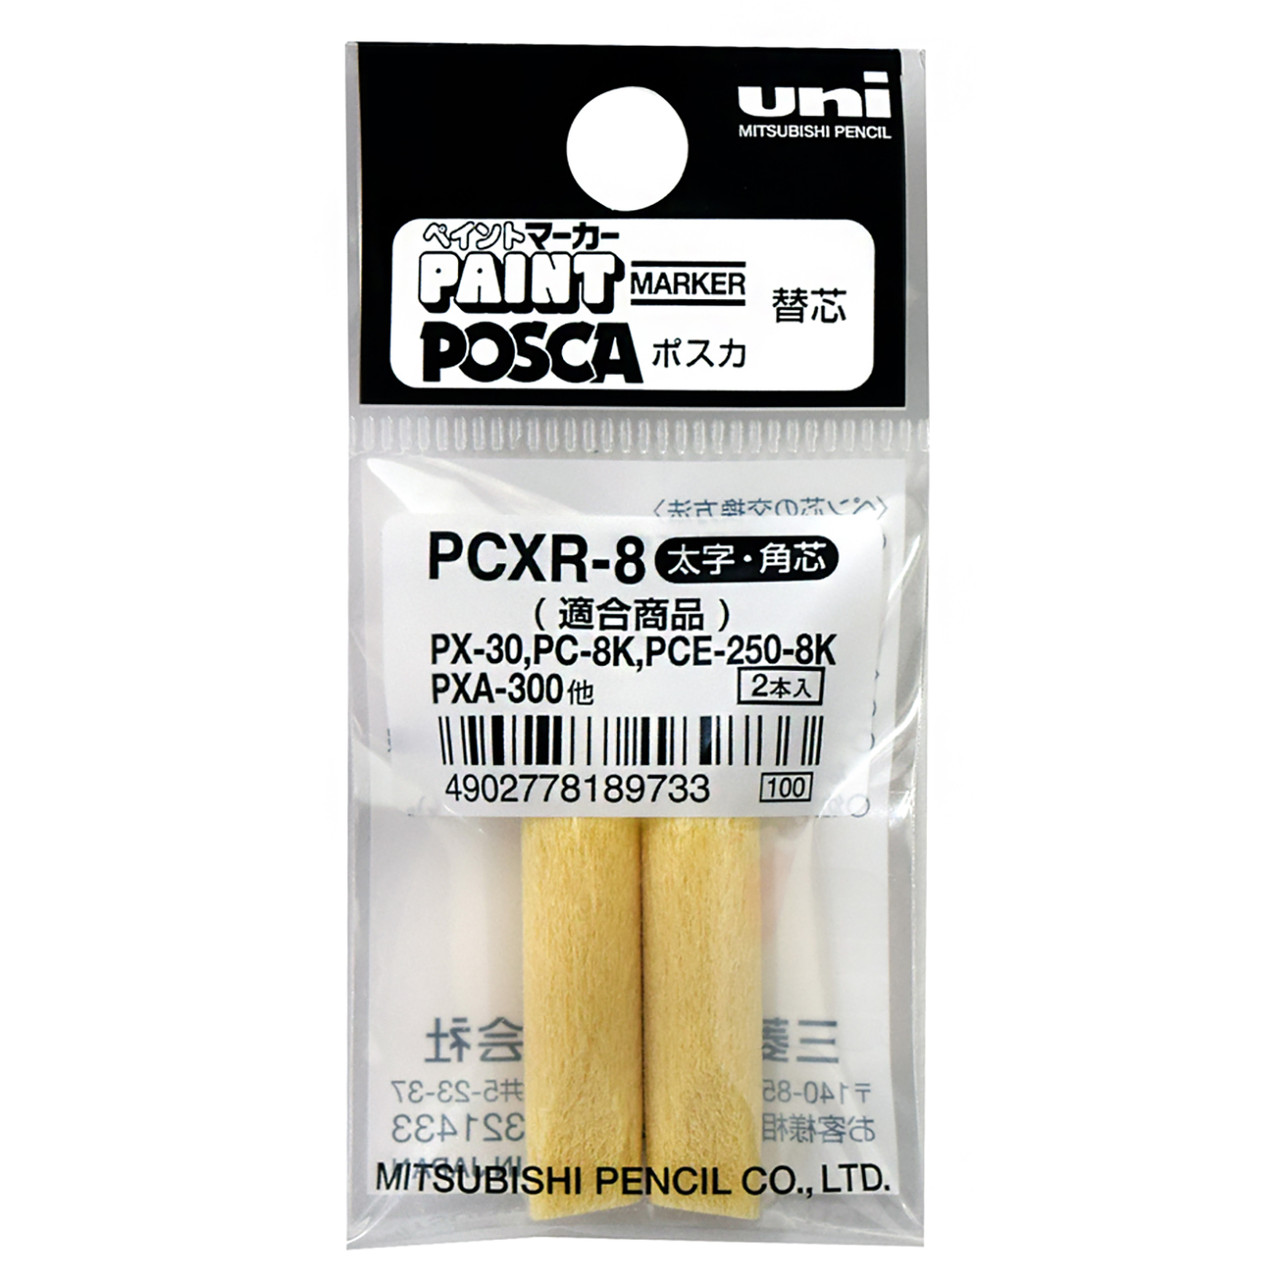 Posca Replacement Tip, Broad PC-8K, Pack of 2 - John Neal Books